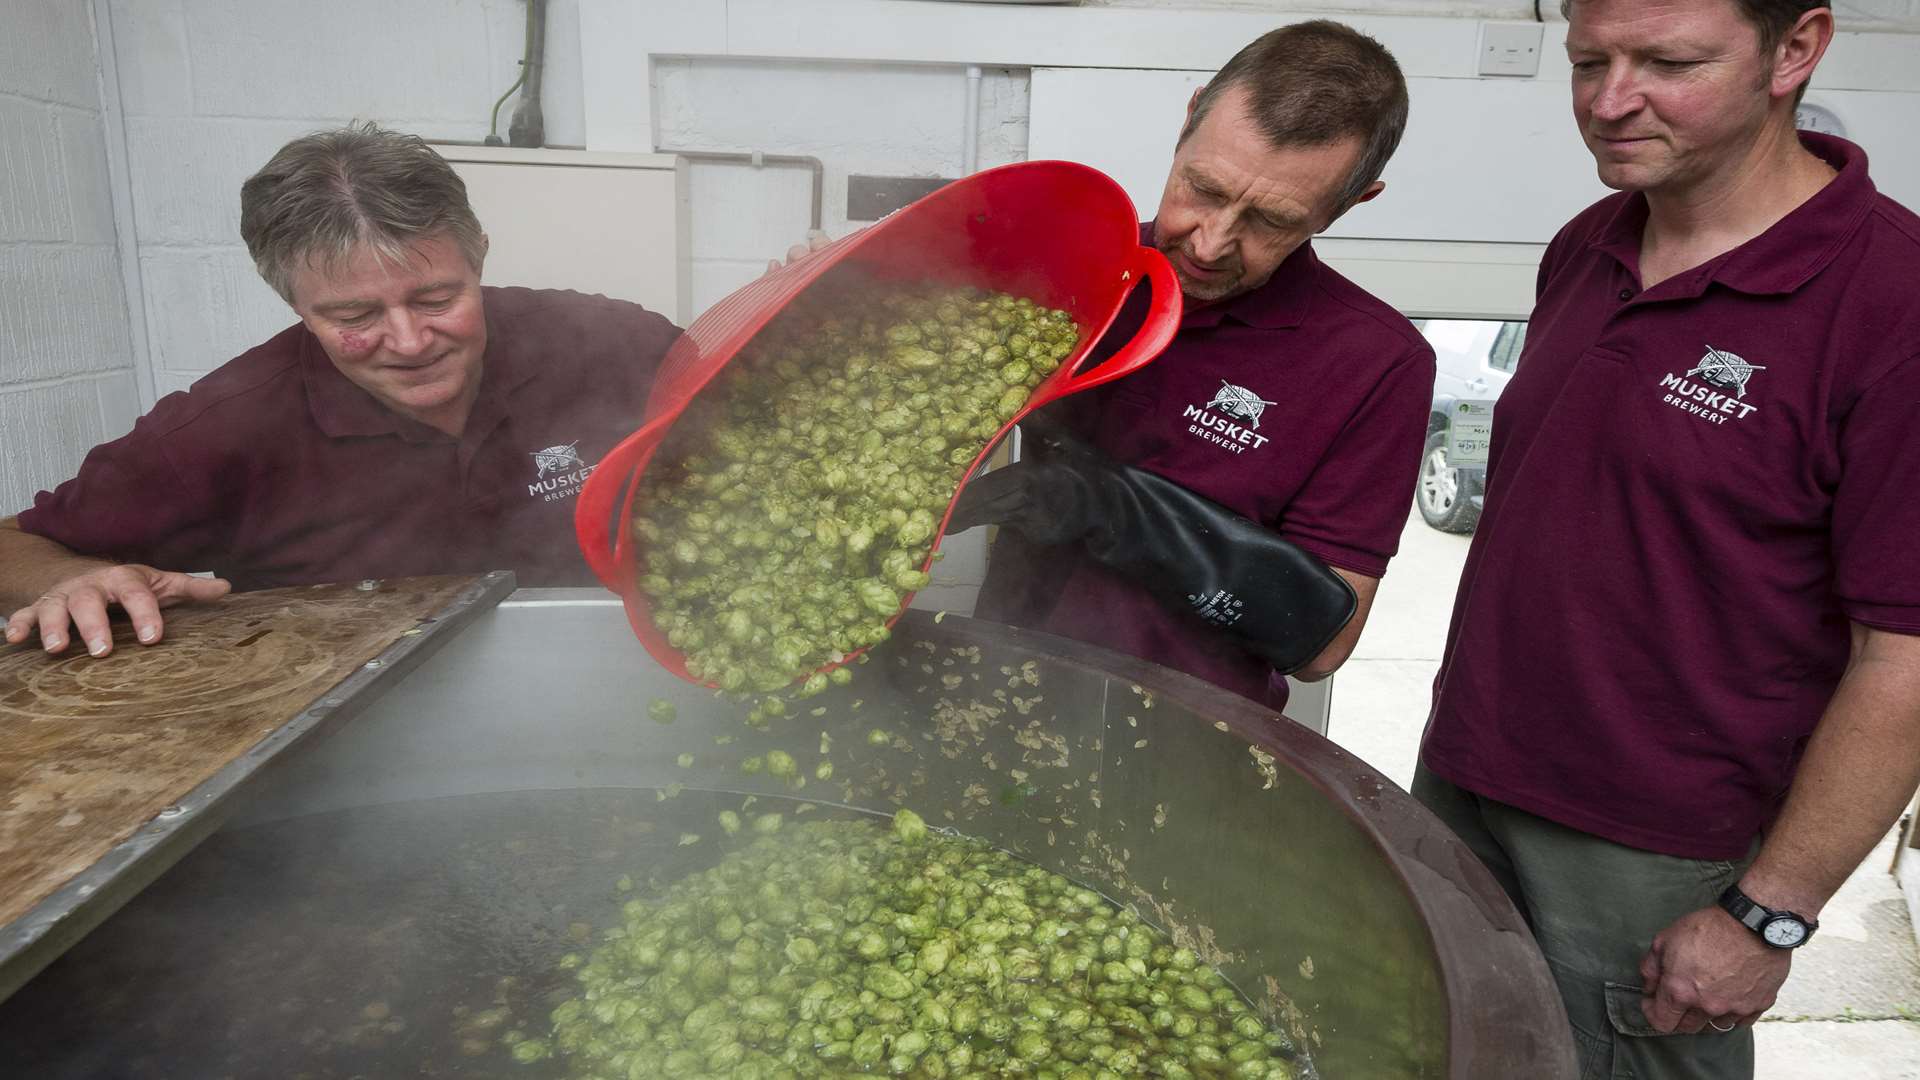 The green hops go in to be brewed